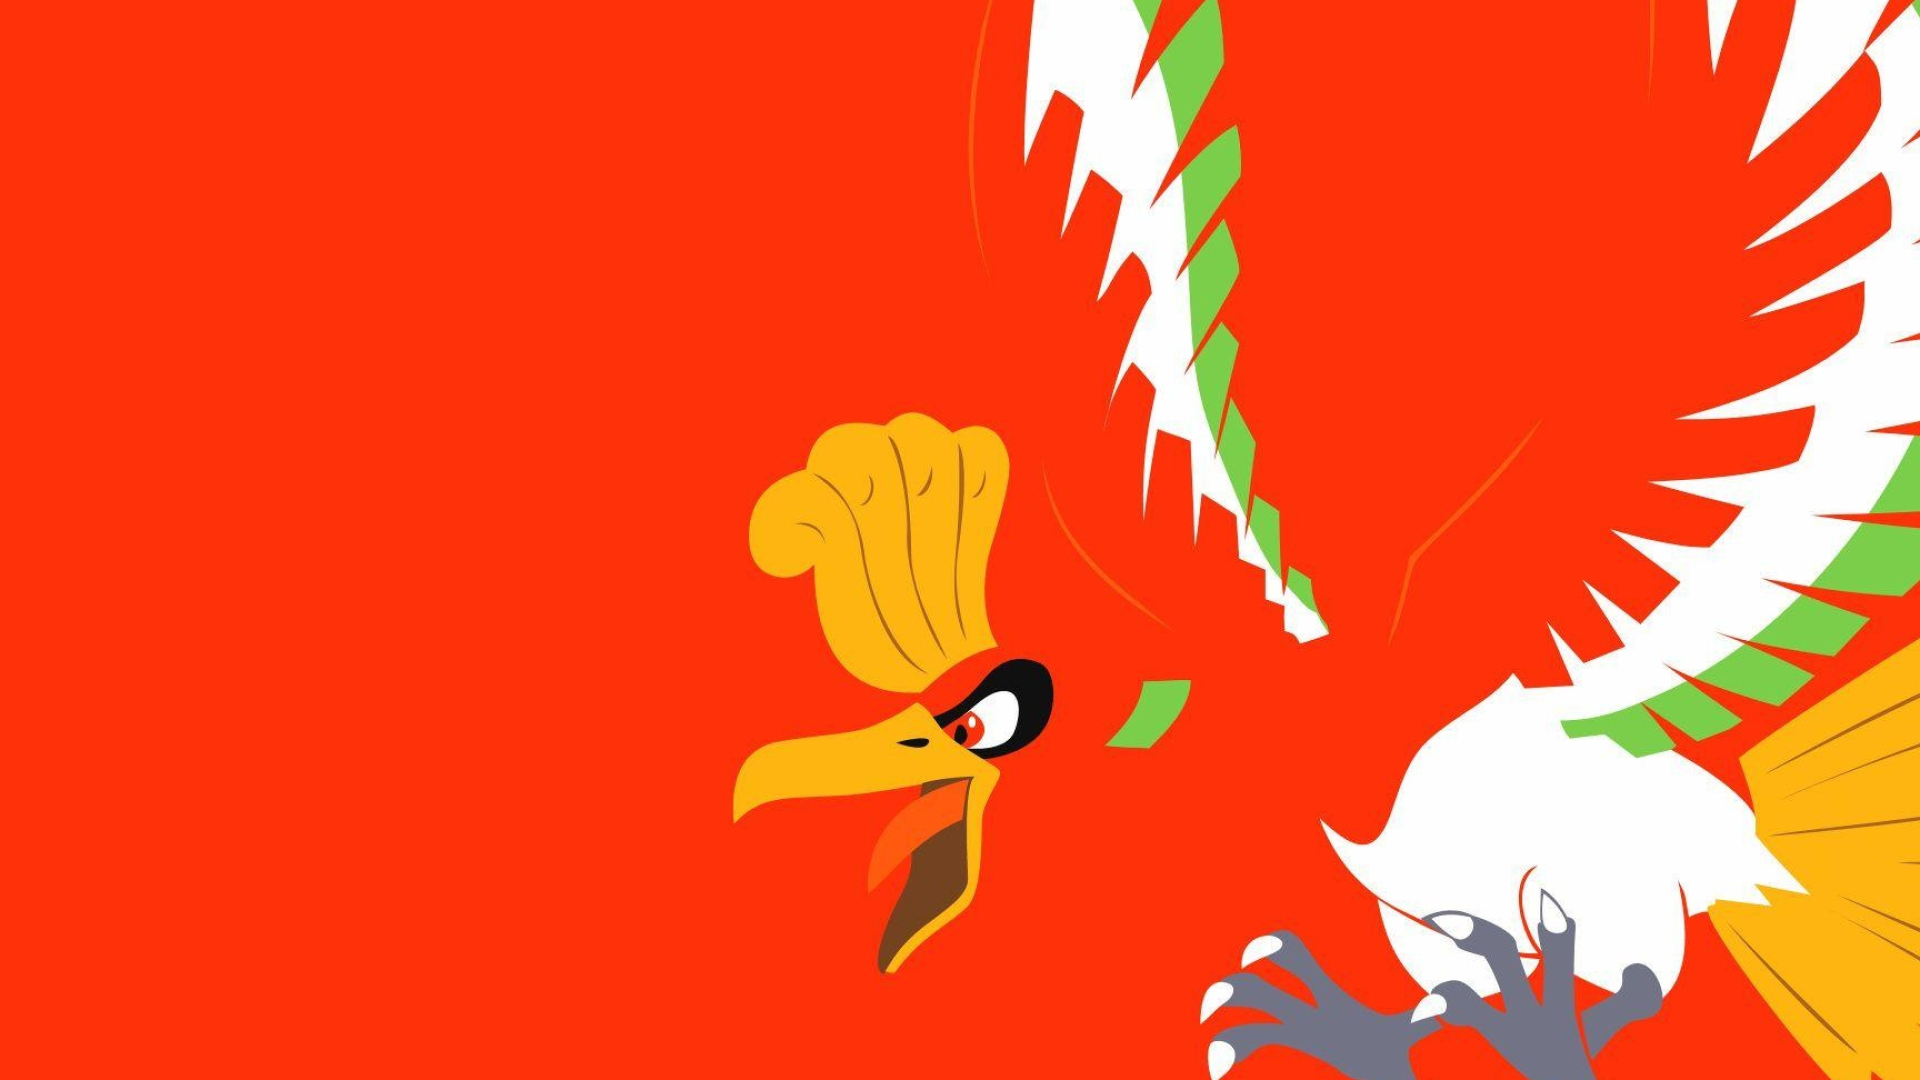 Ho-Oh, Gaming wallpapers, Legendary Pokemon, Flames and feathers, 1920x1080 Full HD Desktop